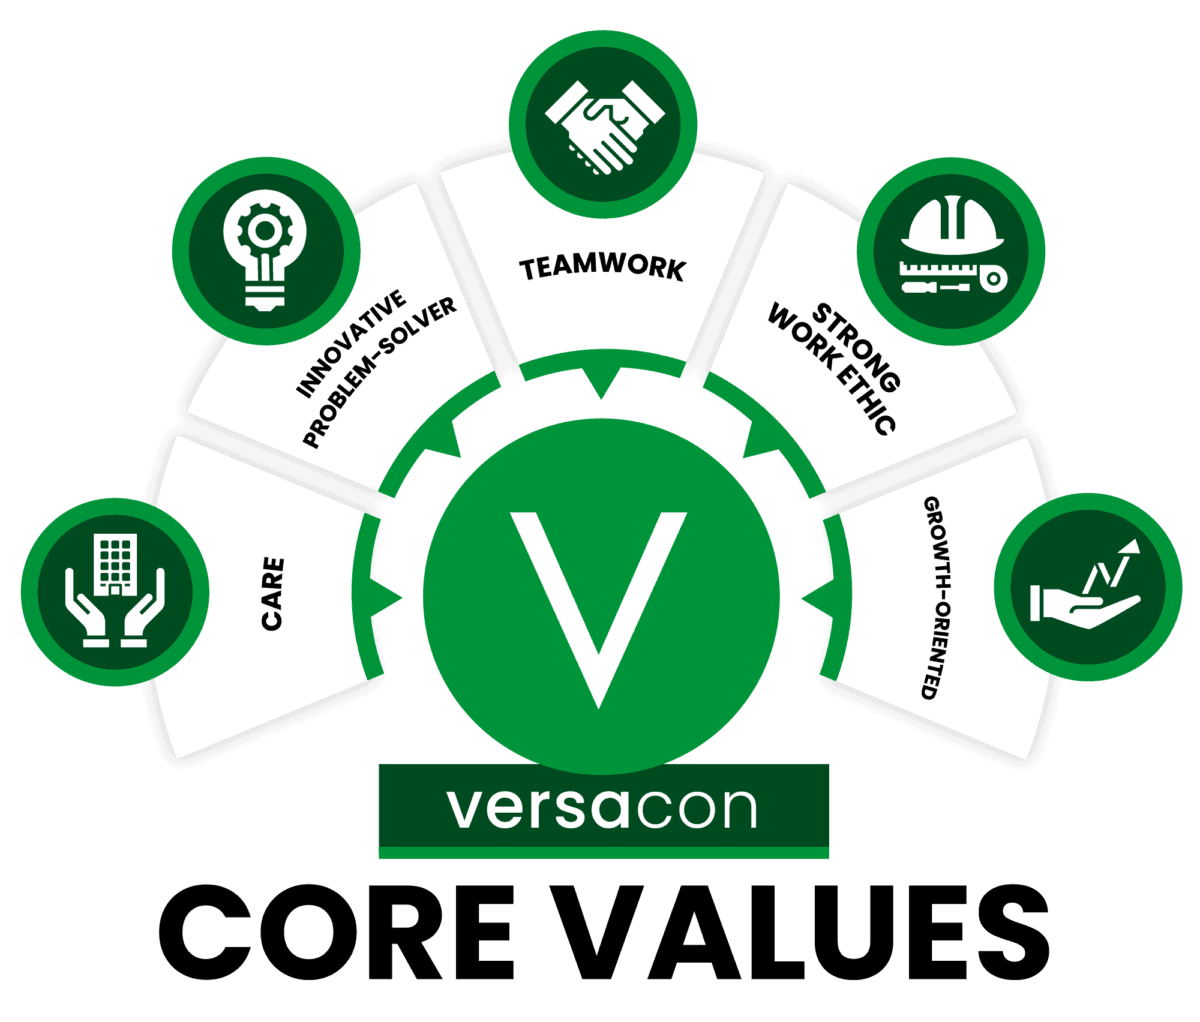 An info graph of our core values. Our core values are: Teamwork, Strong work ethic, Innovative Problem-solver, Growth-oriented, Care